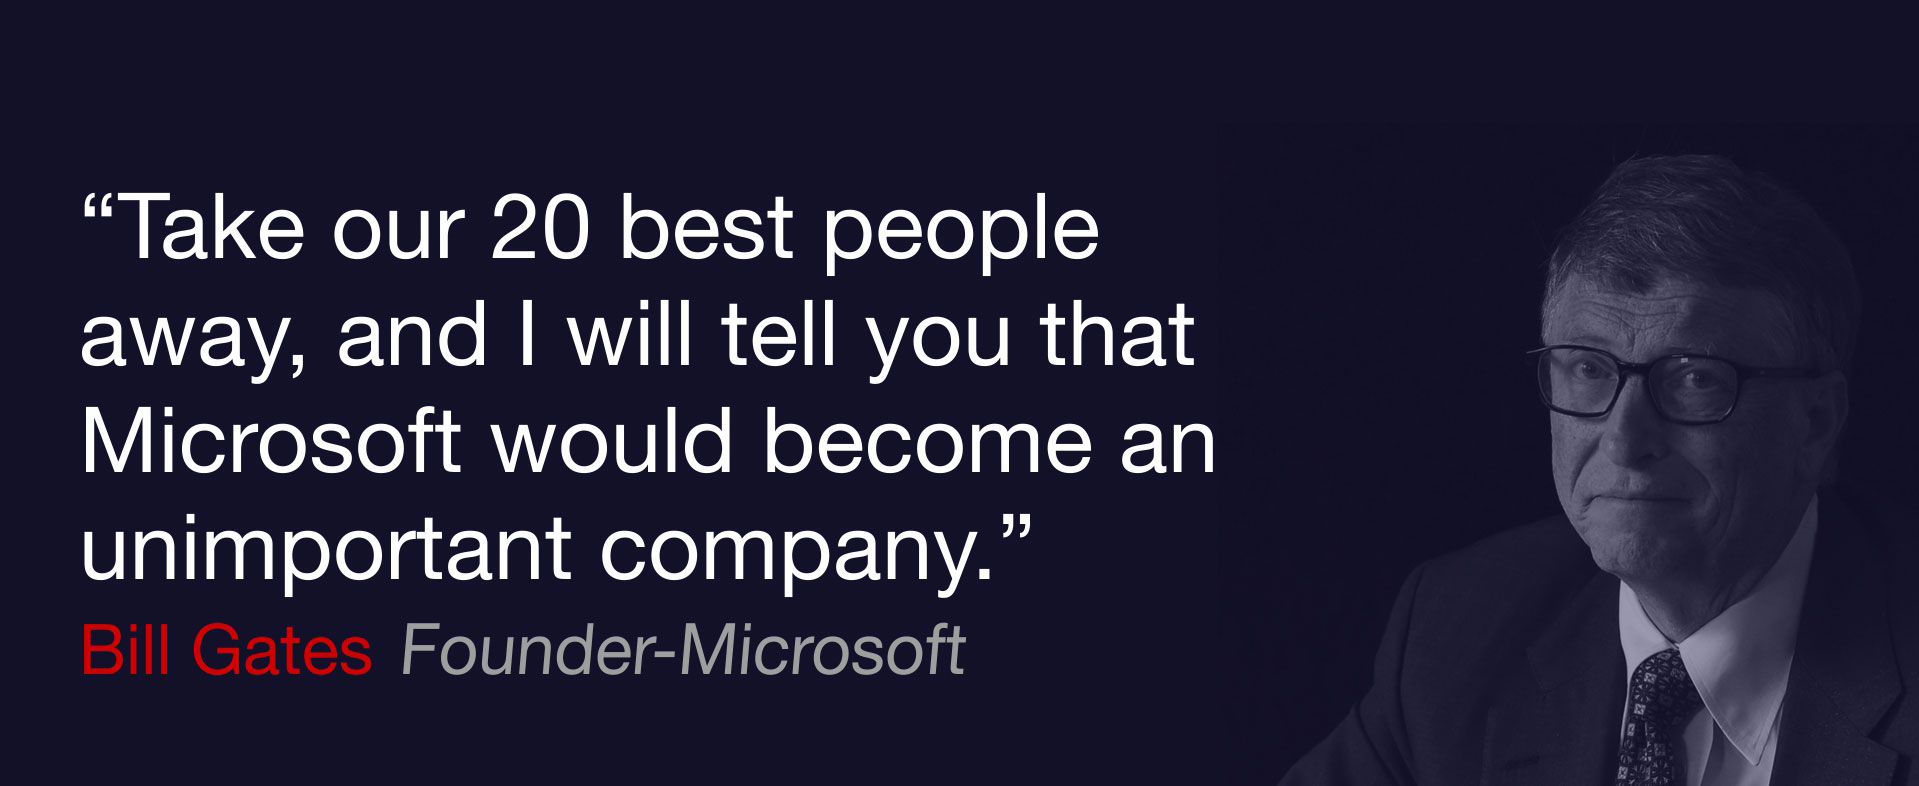 Take our 20 best people away, and I will tell you that Microsoft would become an unimportant company, Bill Gates